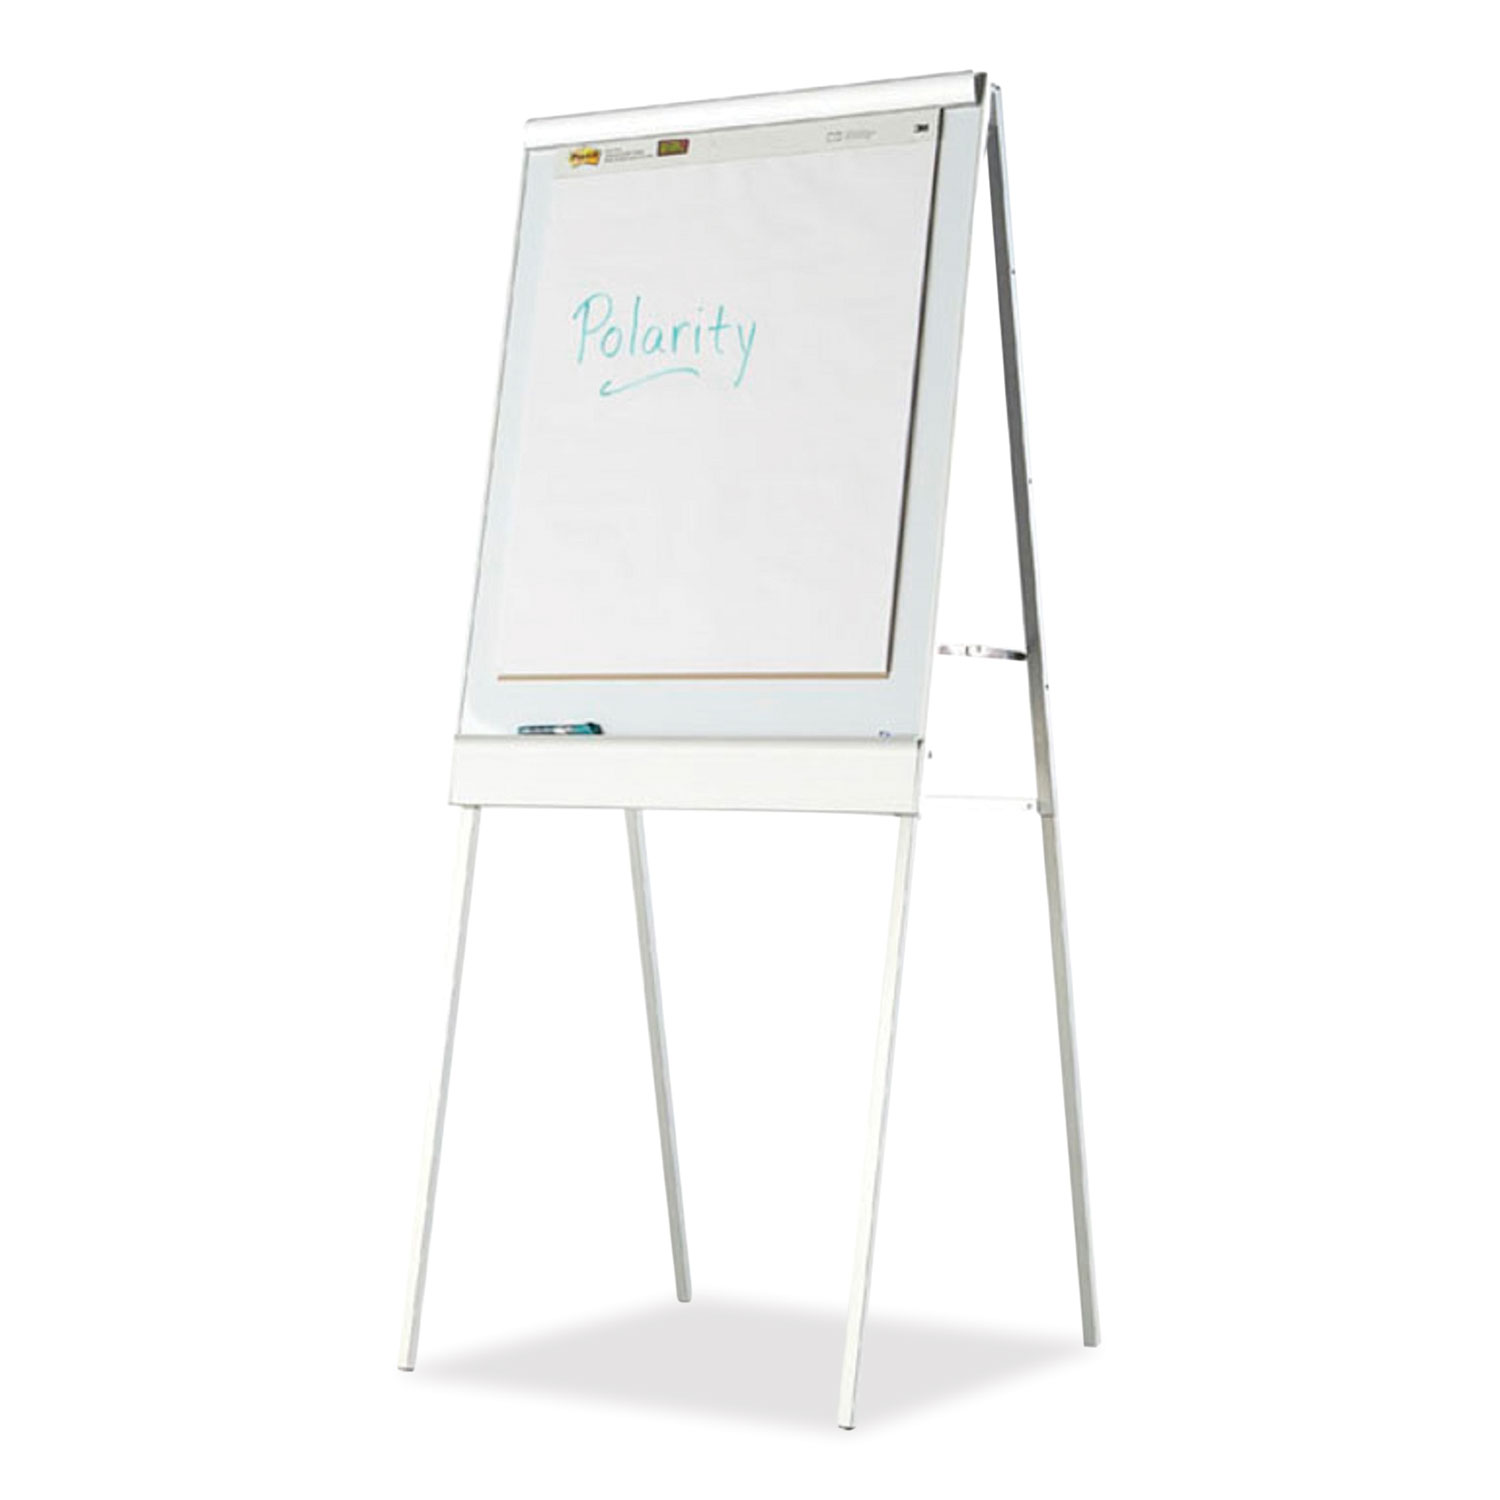 Flip Chart Boards & Easel Pads